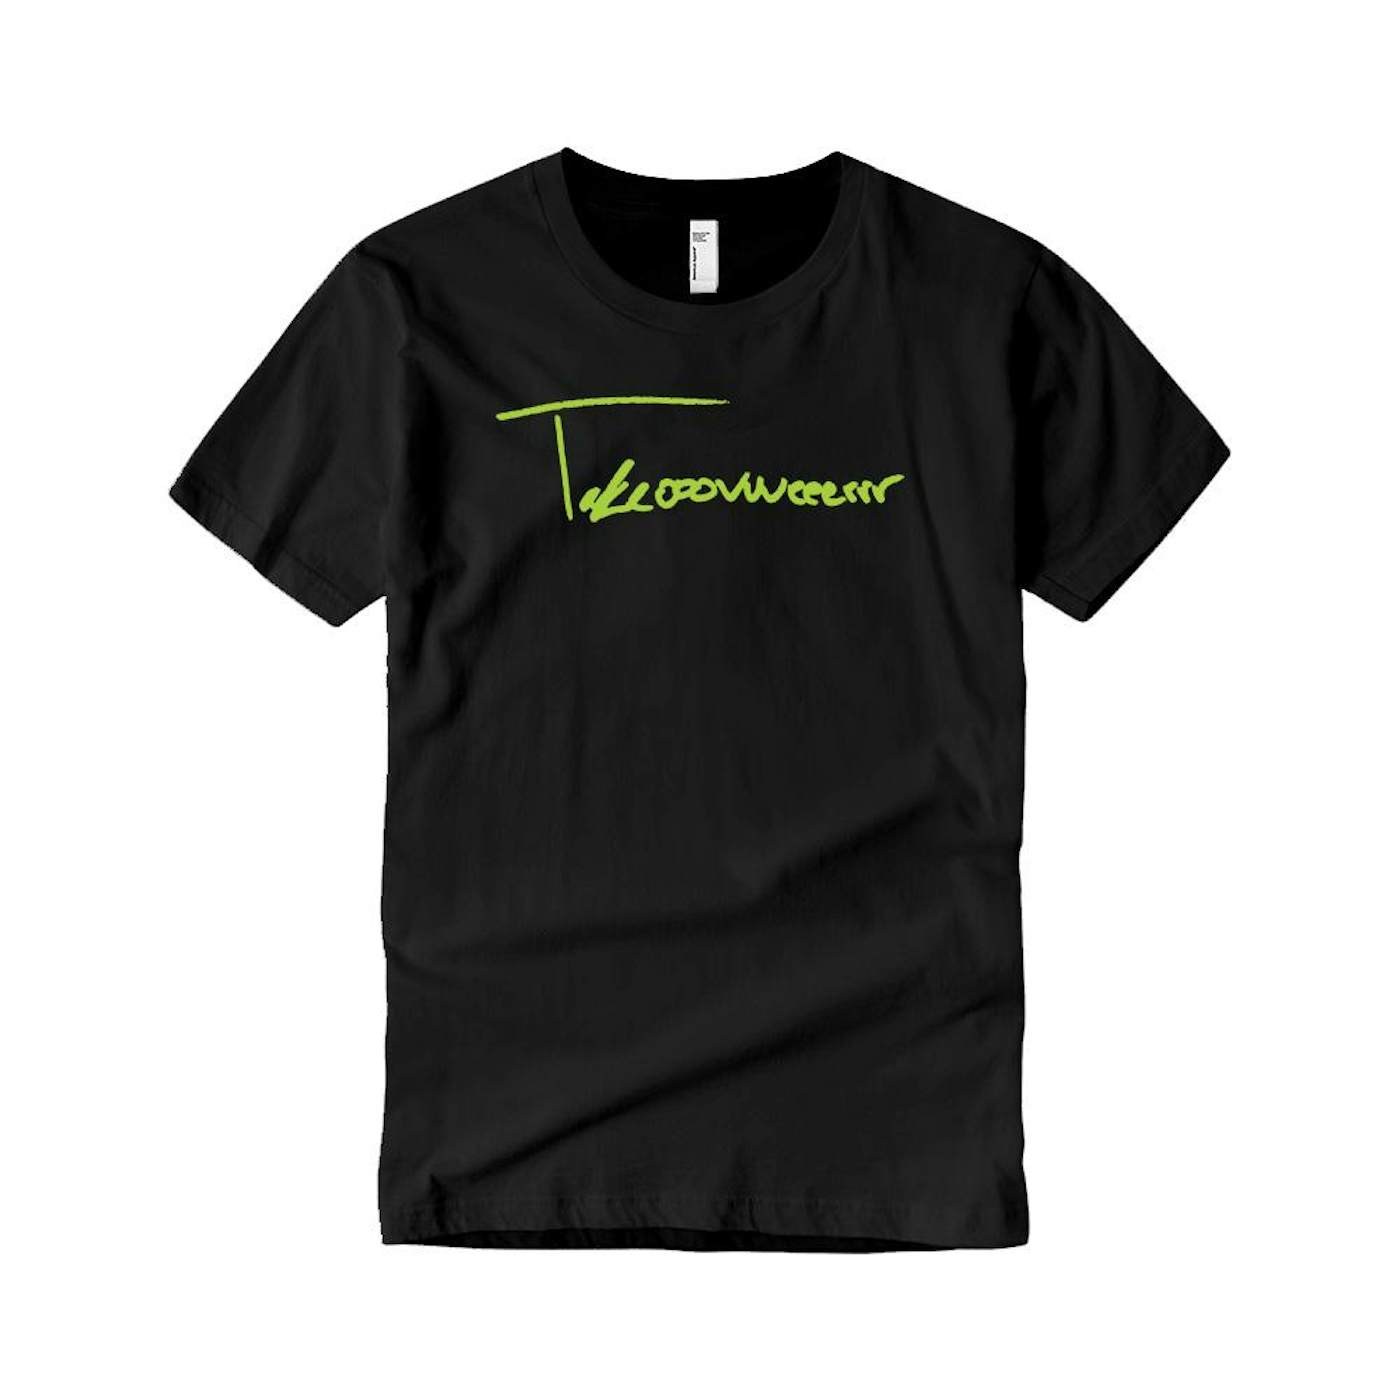 Taylor J Takeover Signature T-Shirt (Black/Neon Green)